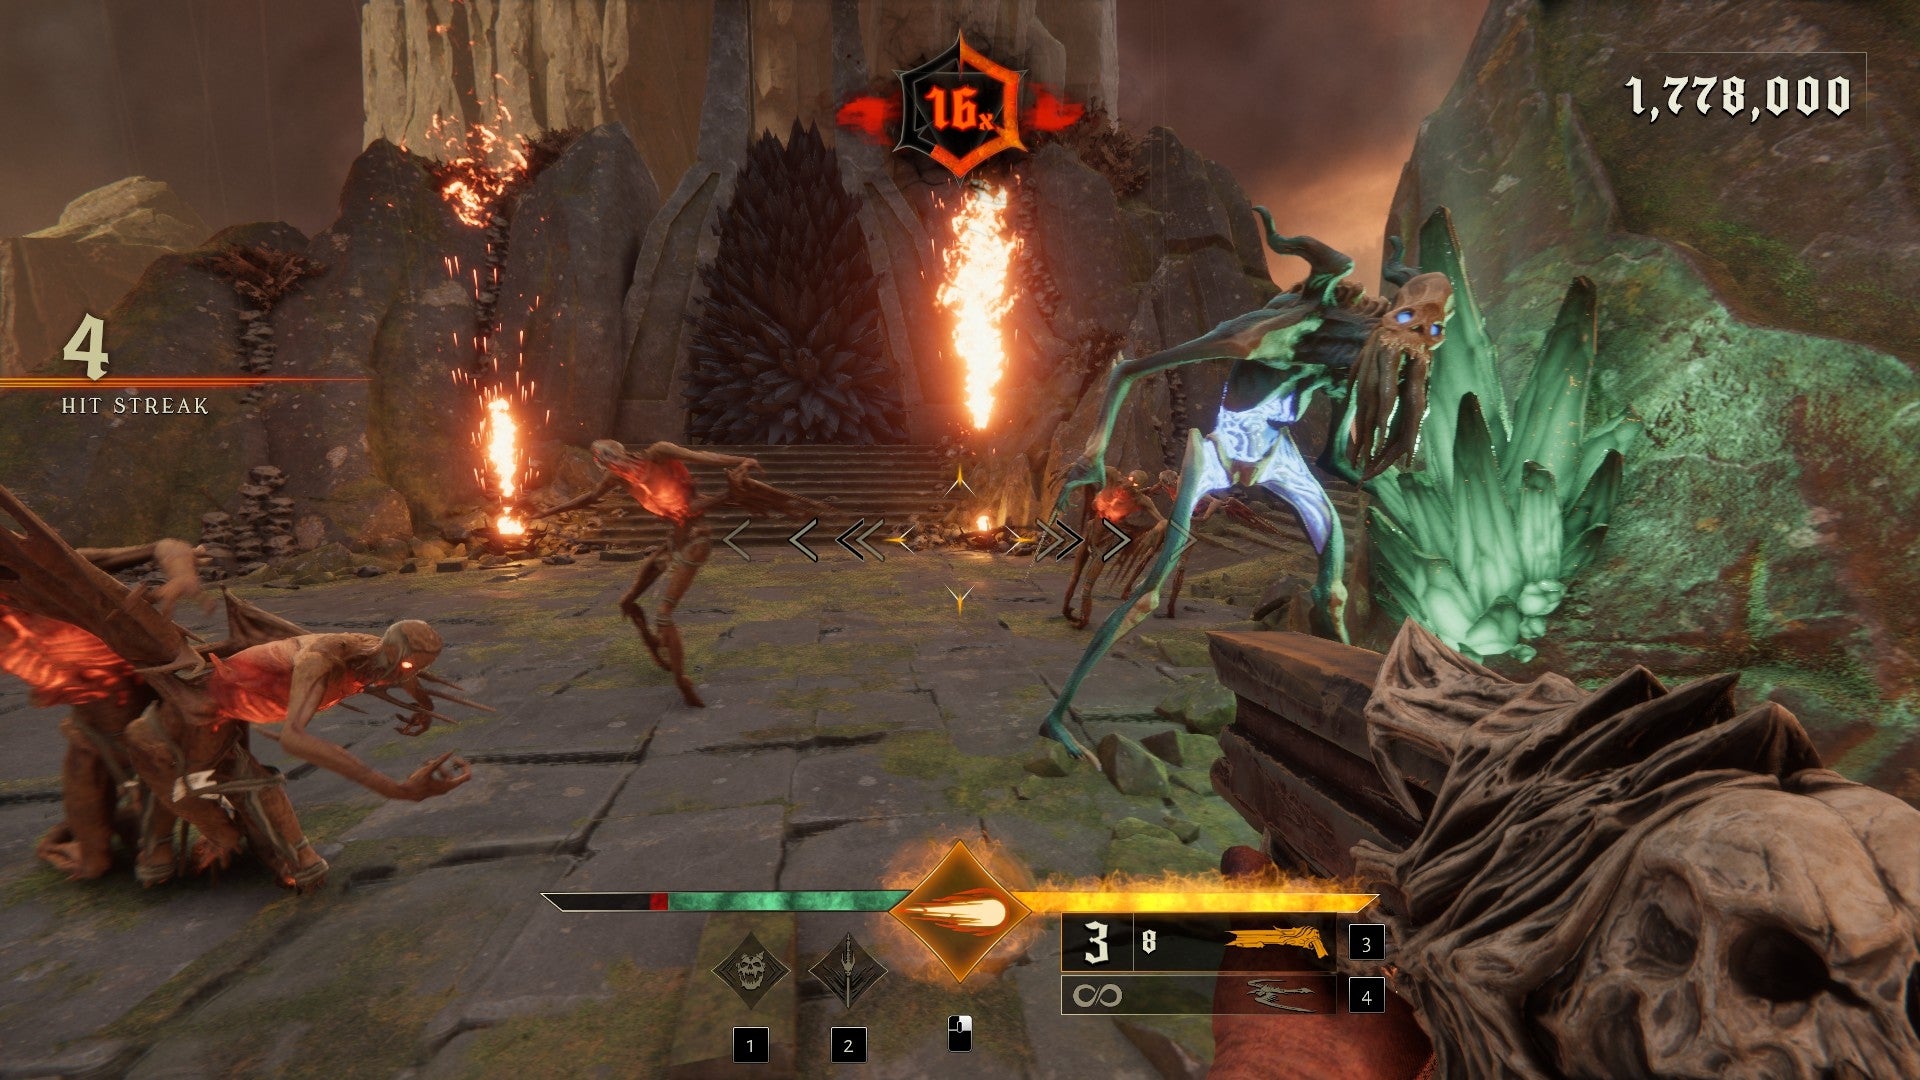 More demons, including a tall spindly one, for slaying in rhythm FPS Metal: Hellsinger.